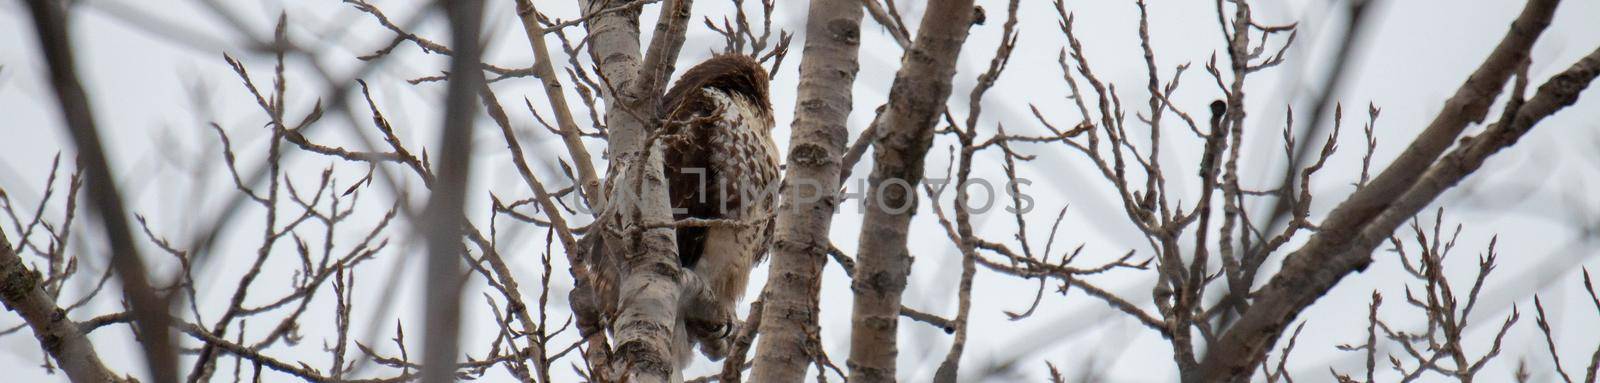 red tail hawk perched in tree in the winter months  by mynewturtle1